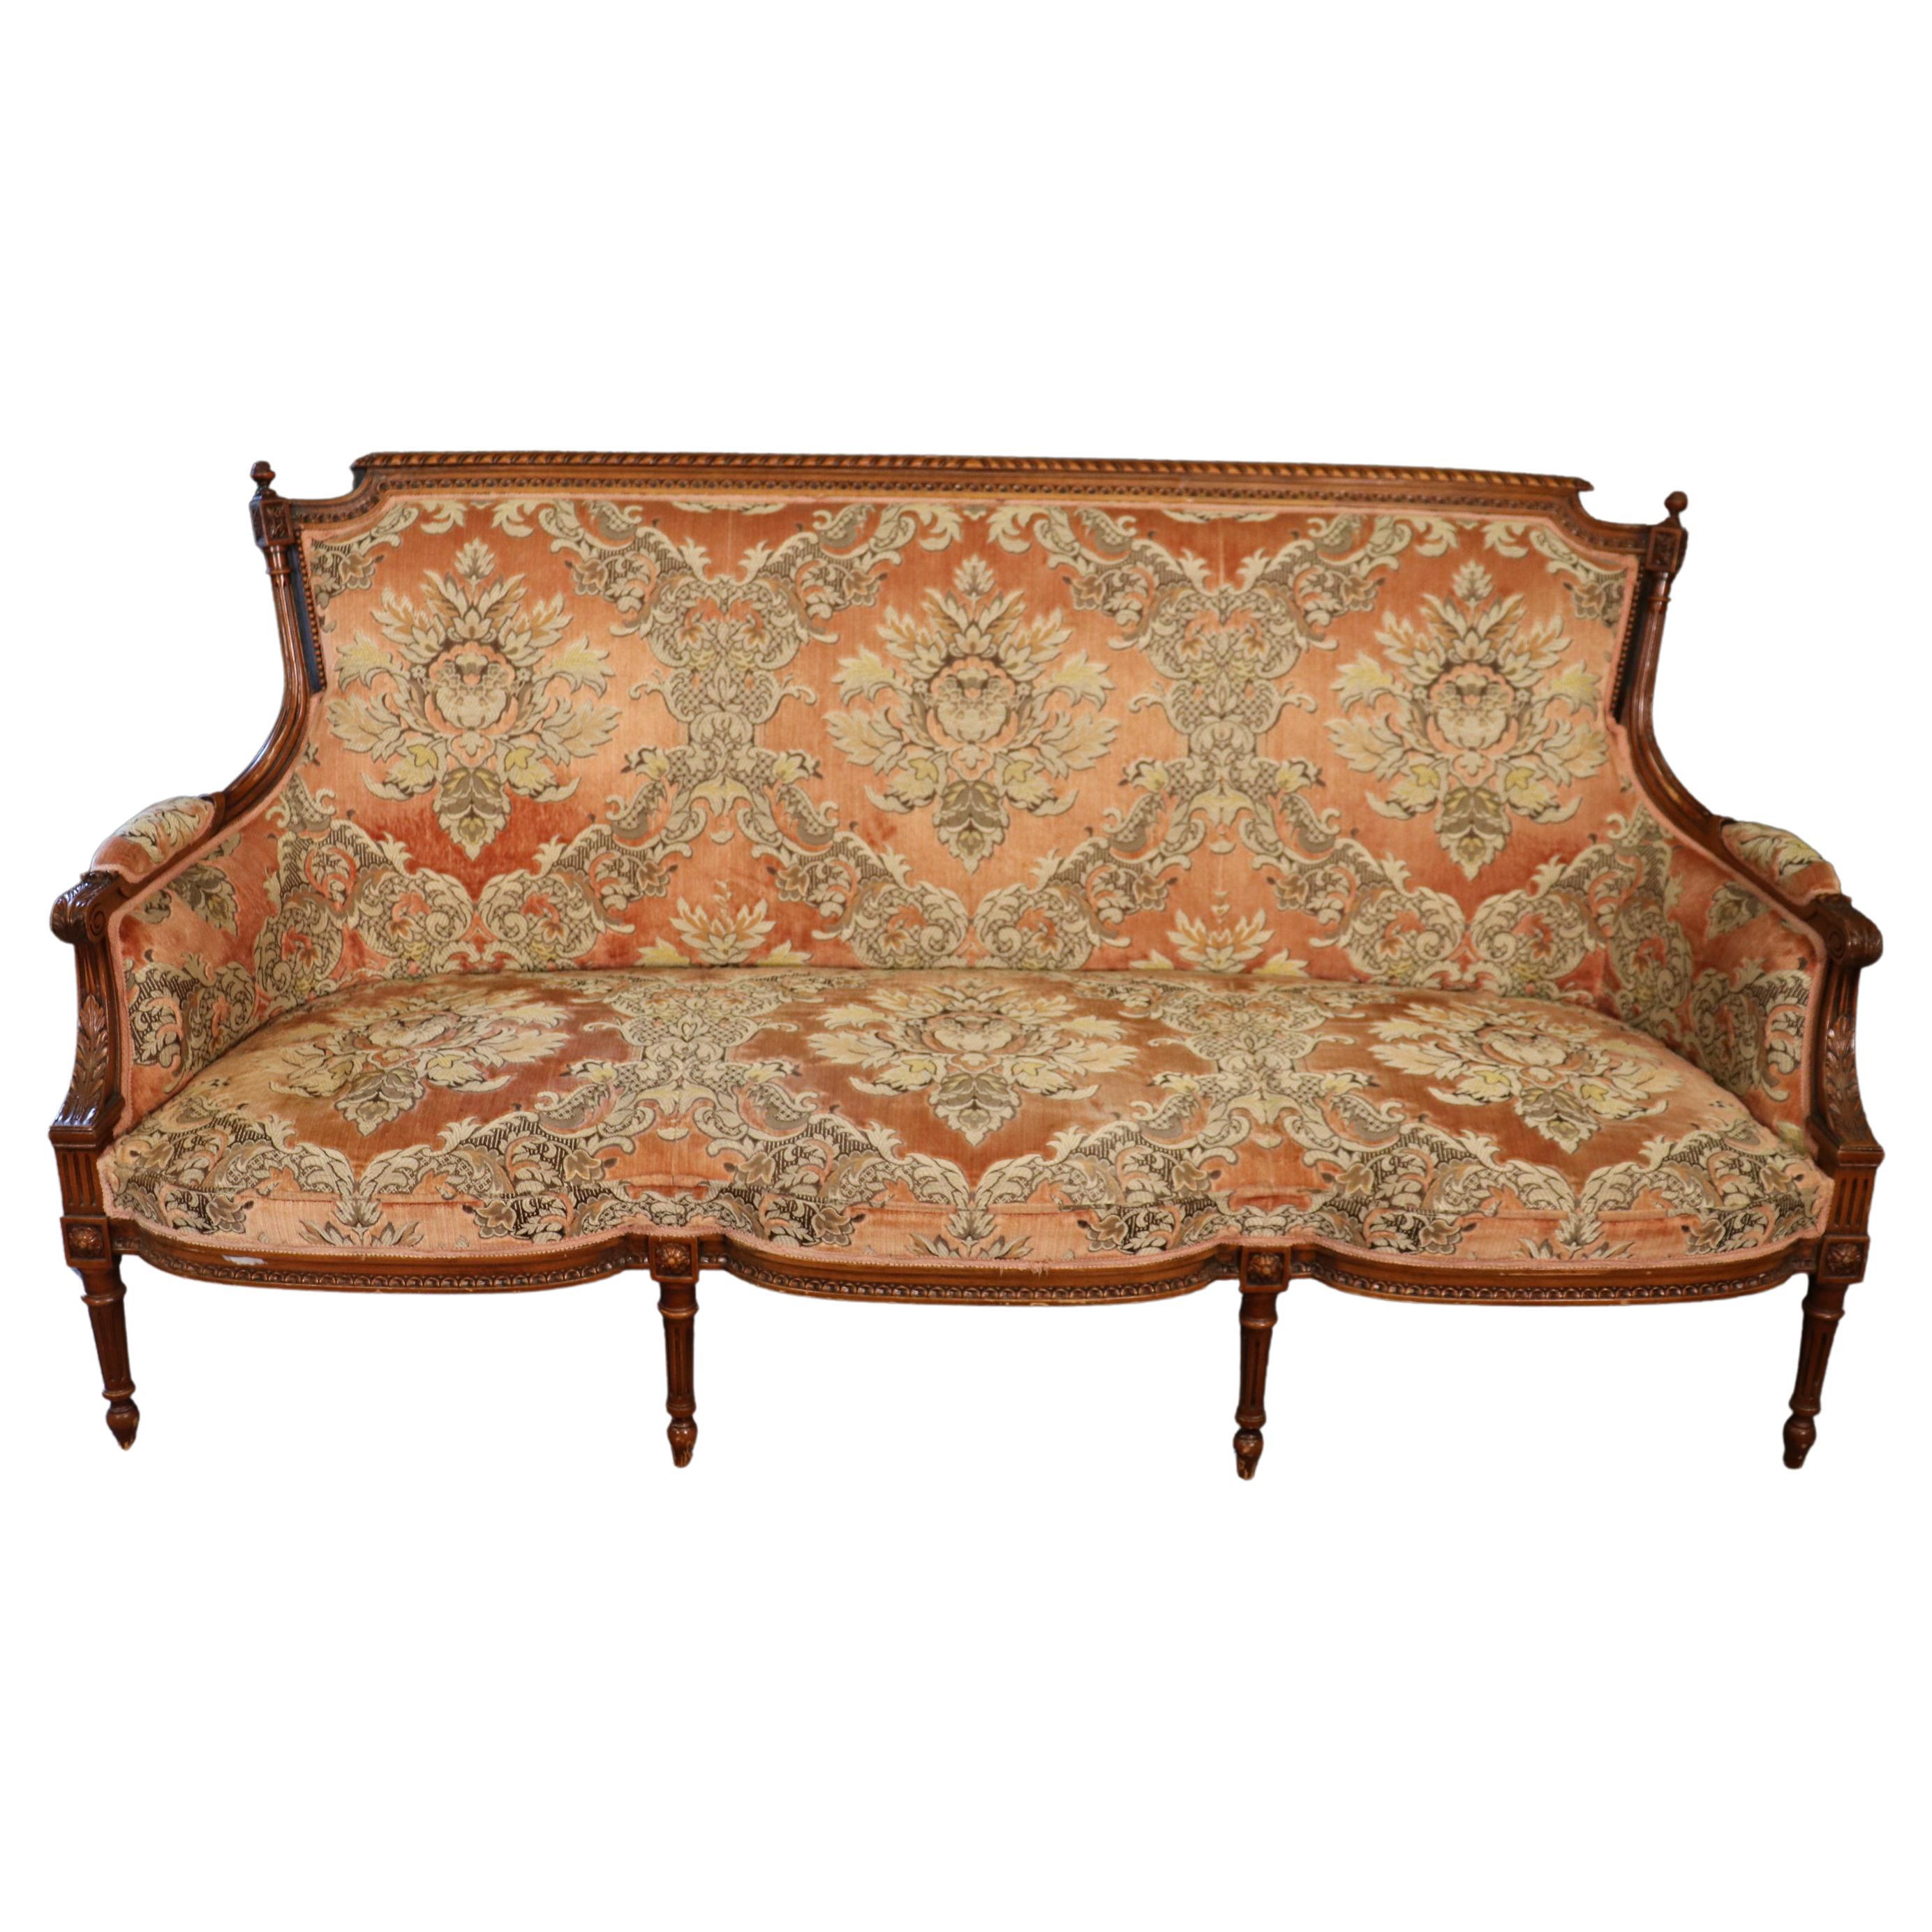 Superb Carved Walnut French Louis XVI Settee Canape Sofa circa 1940